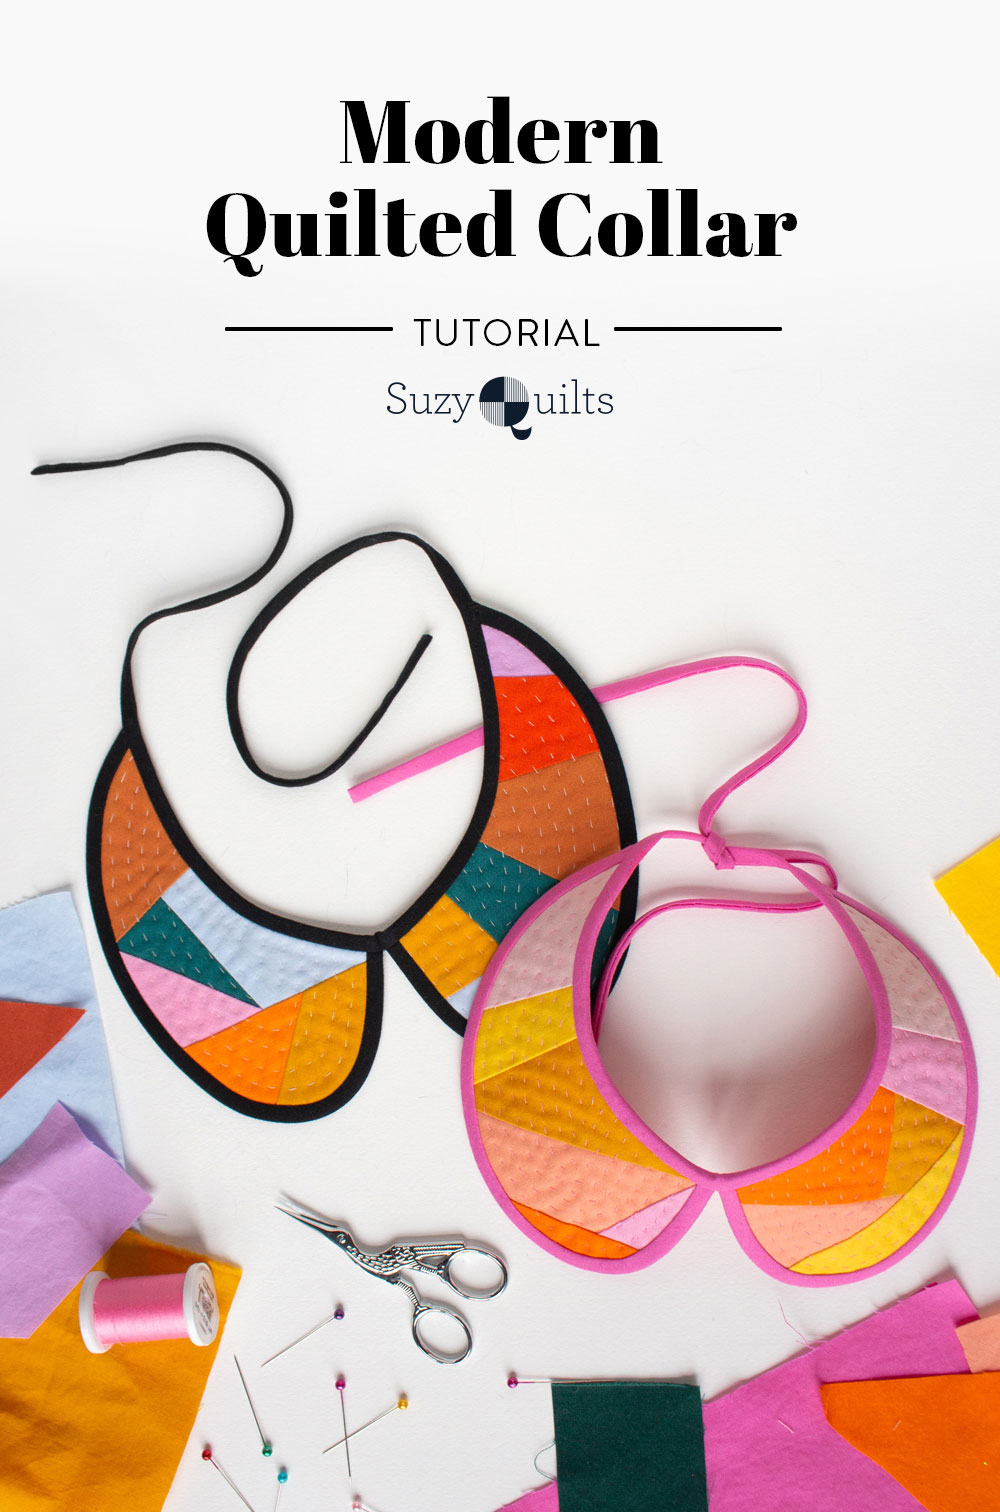 Use this adorable modern quilted collar tutorial to spice up your wardrobe! This sewing tutorial is perfect for upcycling scrap fabric. suzyquilts.com